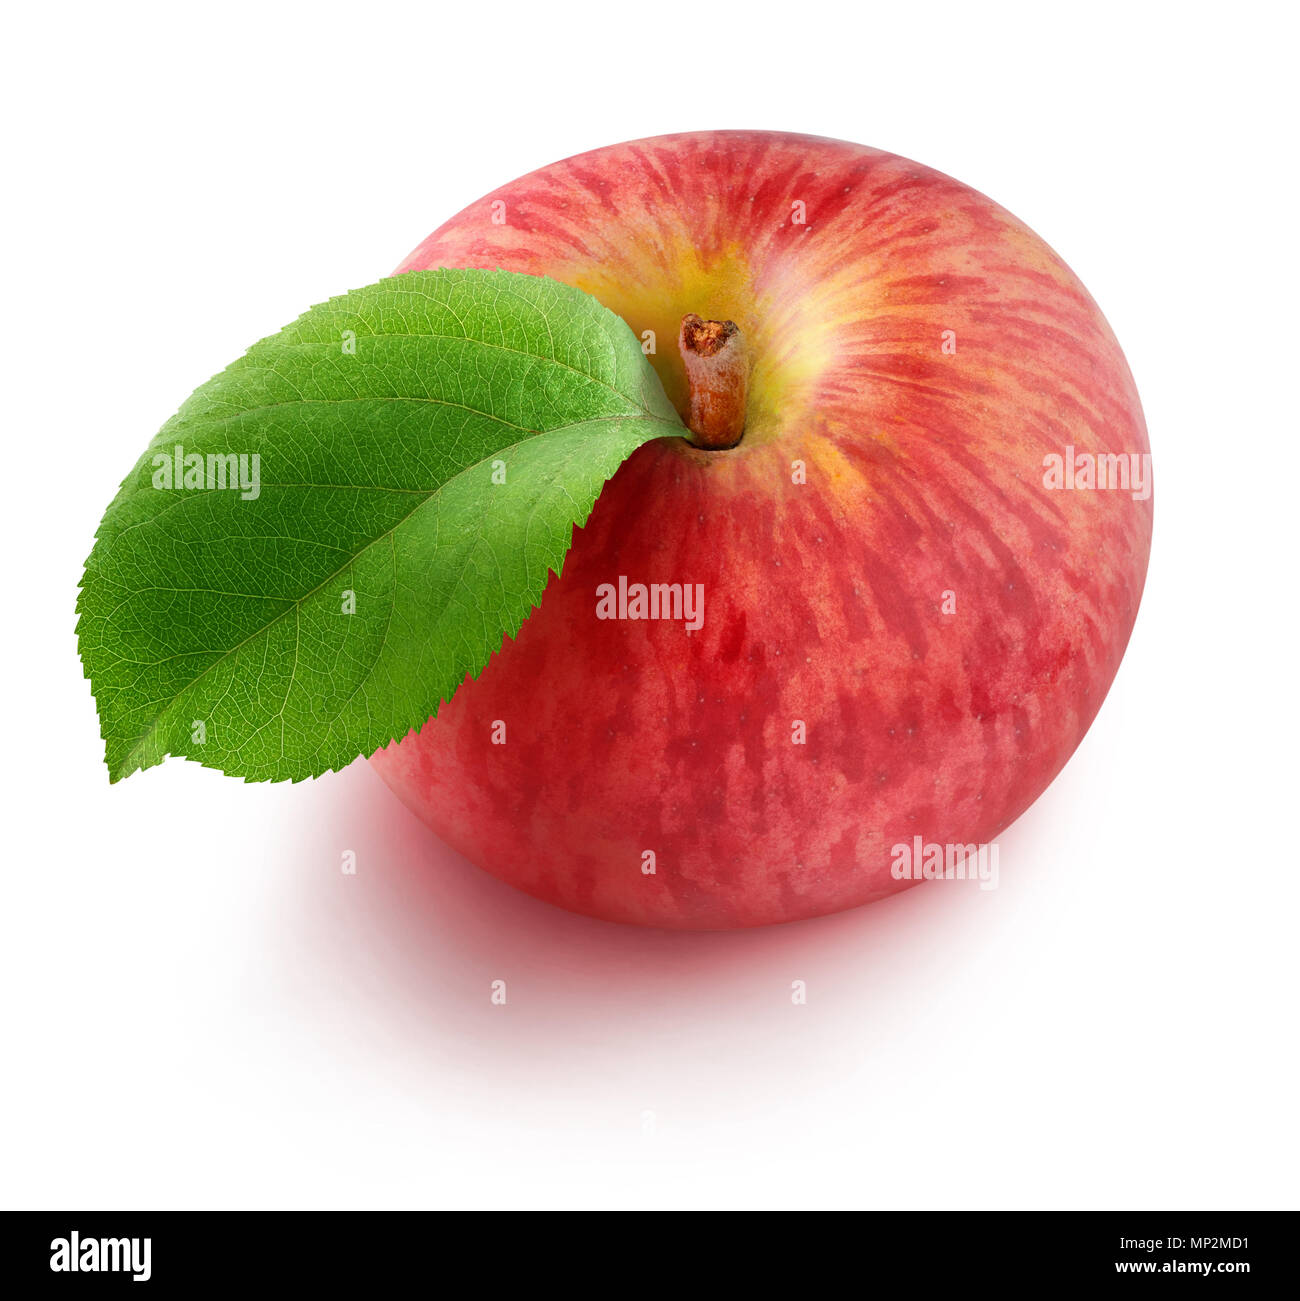 Isolated apple. One red apple with a leaf, top view, isolated on white background with clipping path Stock Photo